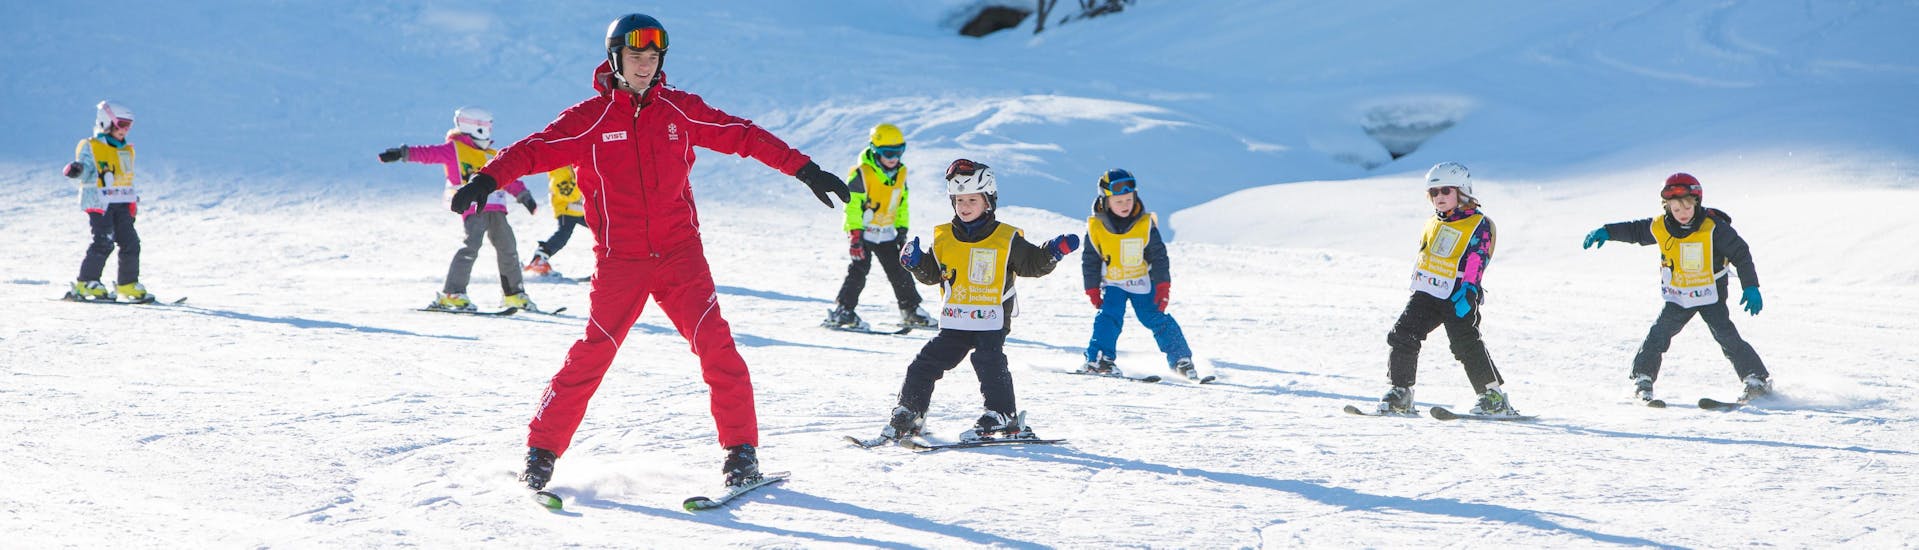 A group of children with their instructor during kids ski lessons for beginners with ski school Jochberg.